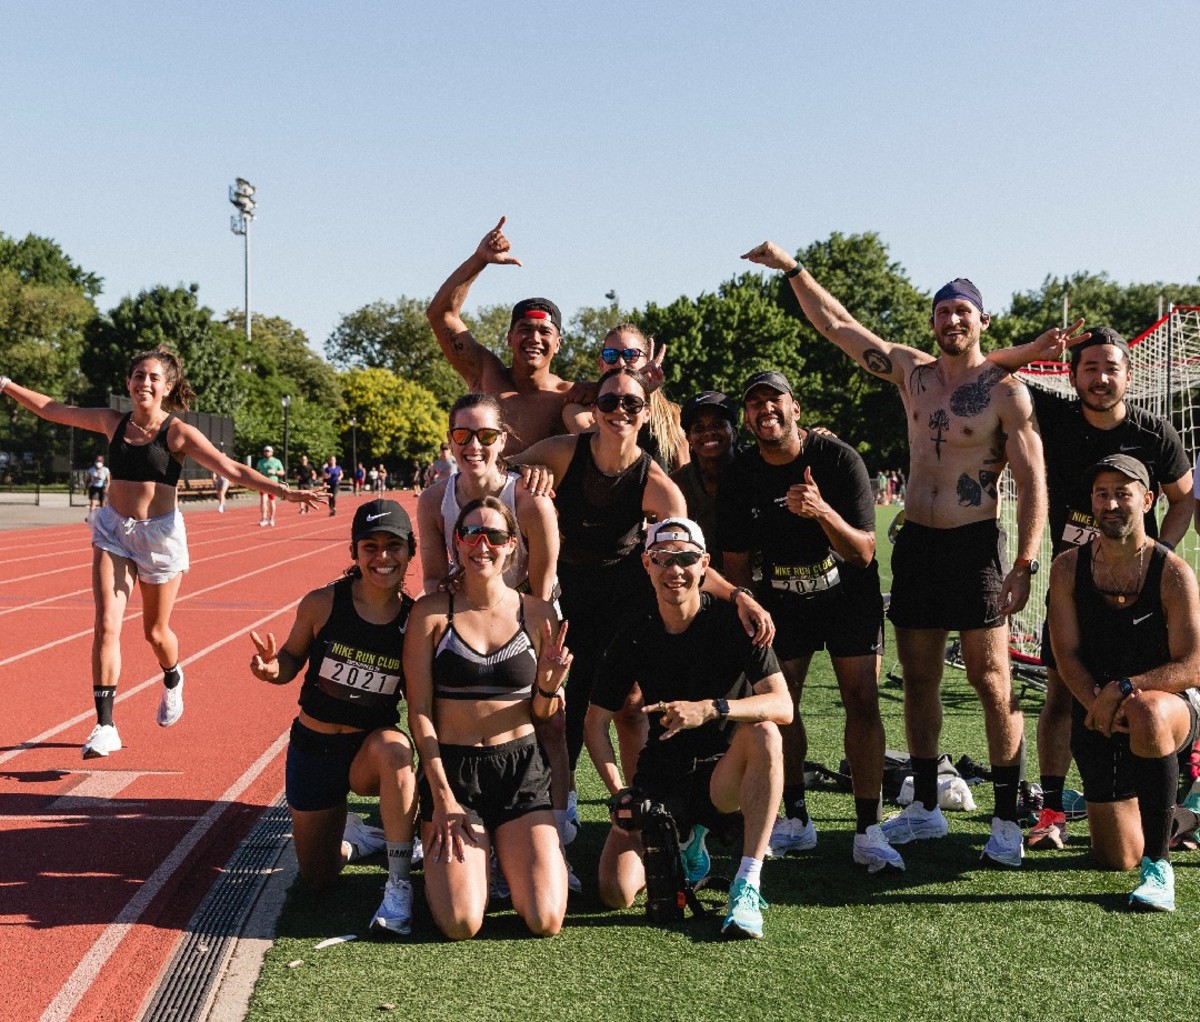 Group of men and women posing for photo next to female running on track